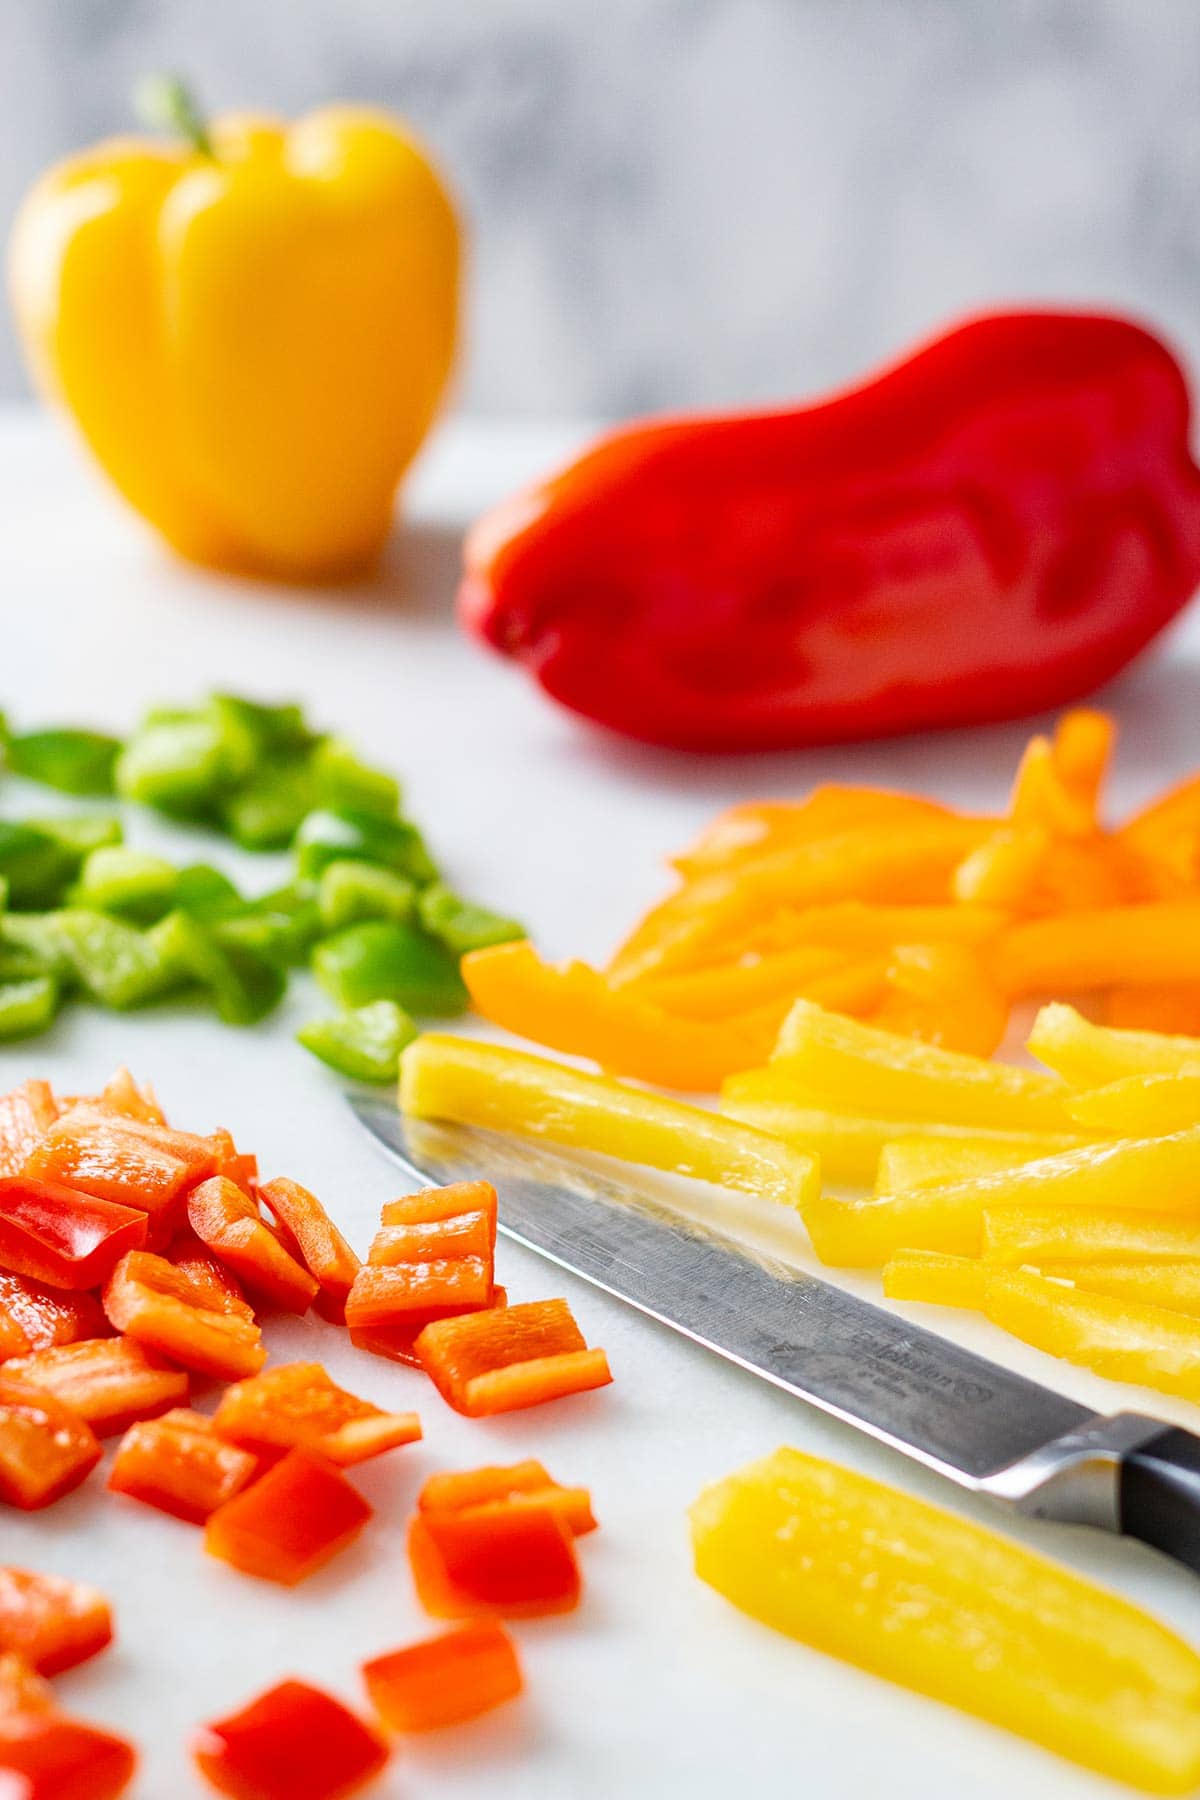 Diced and sliced bell peppers on a white countertop.